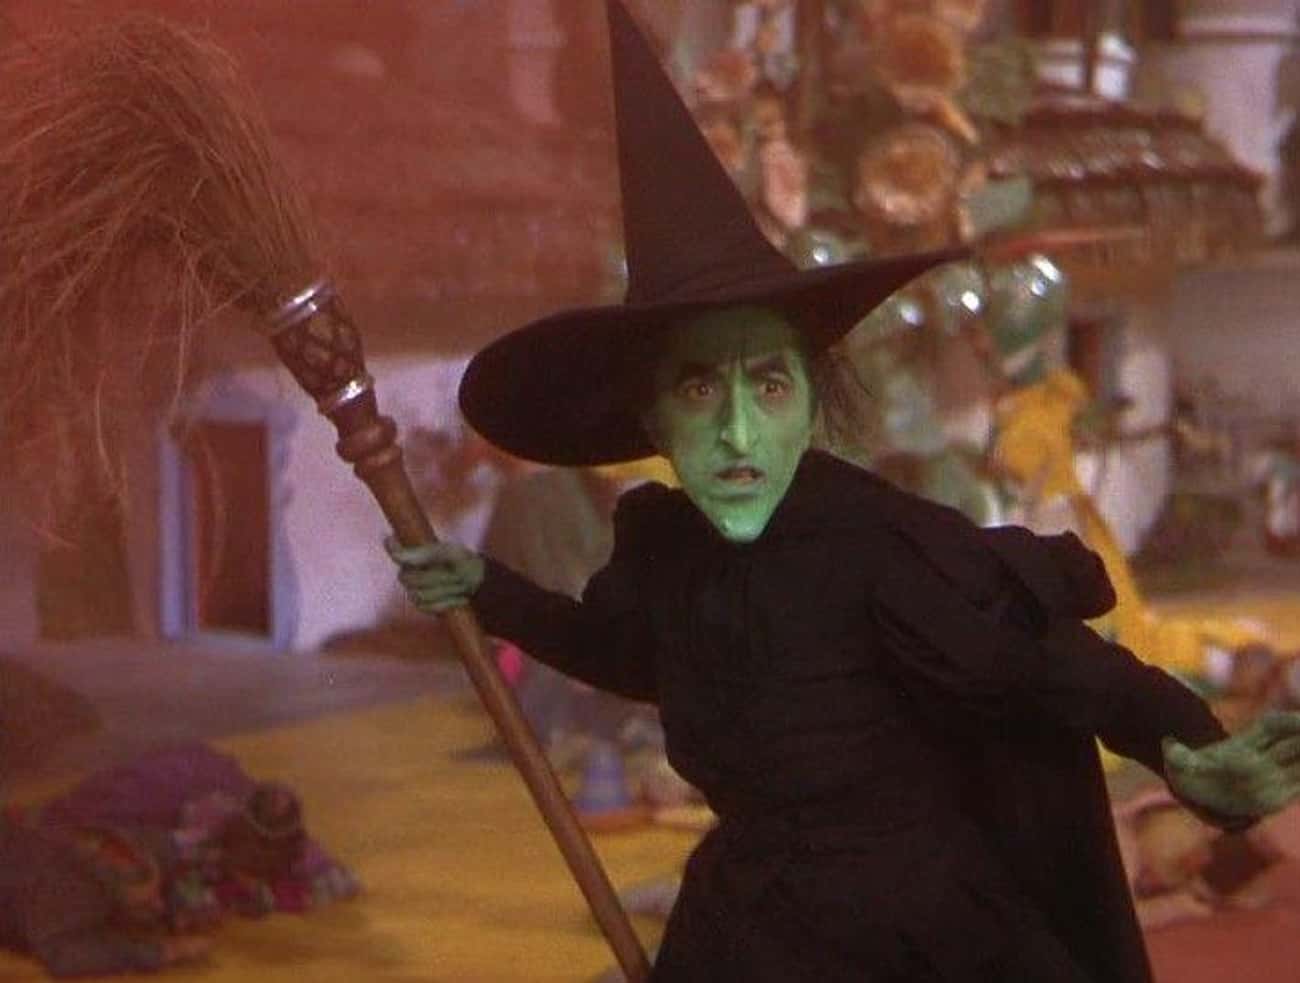 The Wicked Witch Got Burned On Set. Twice